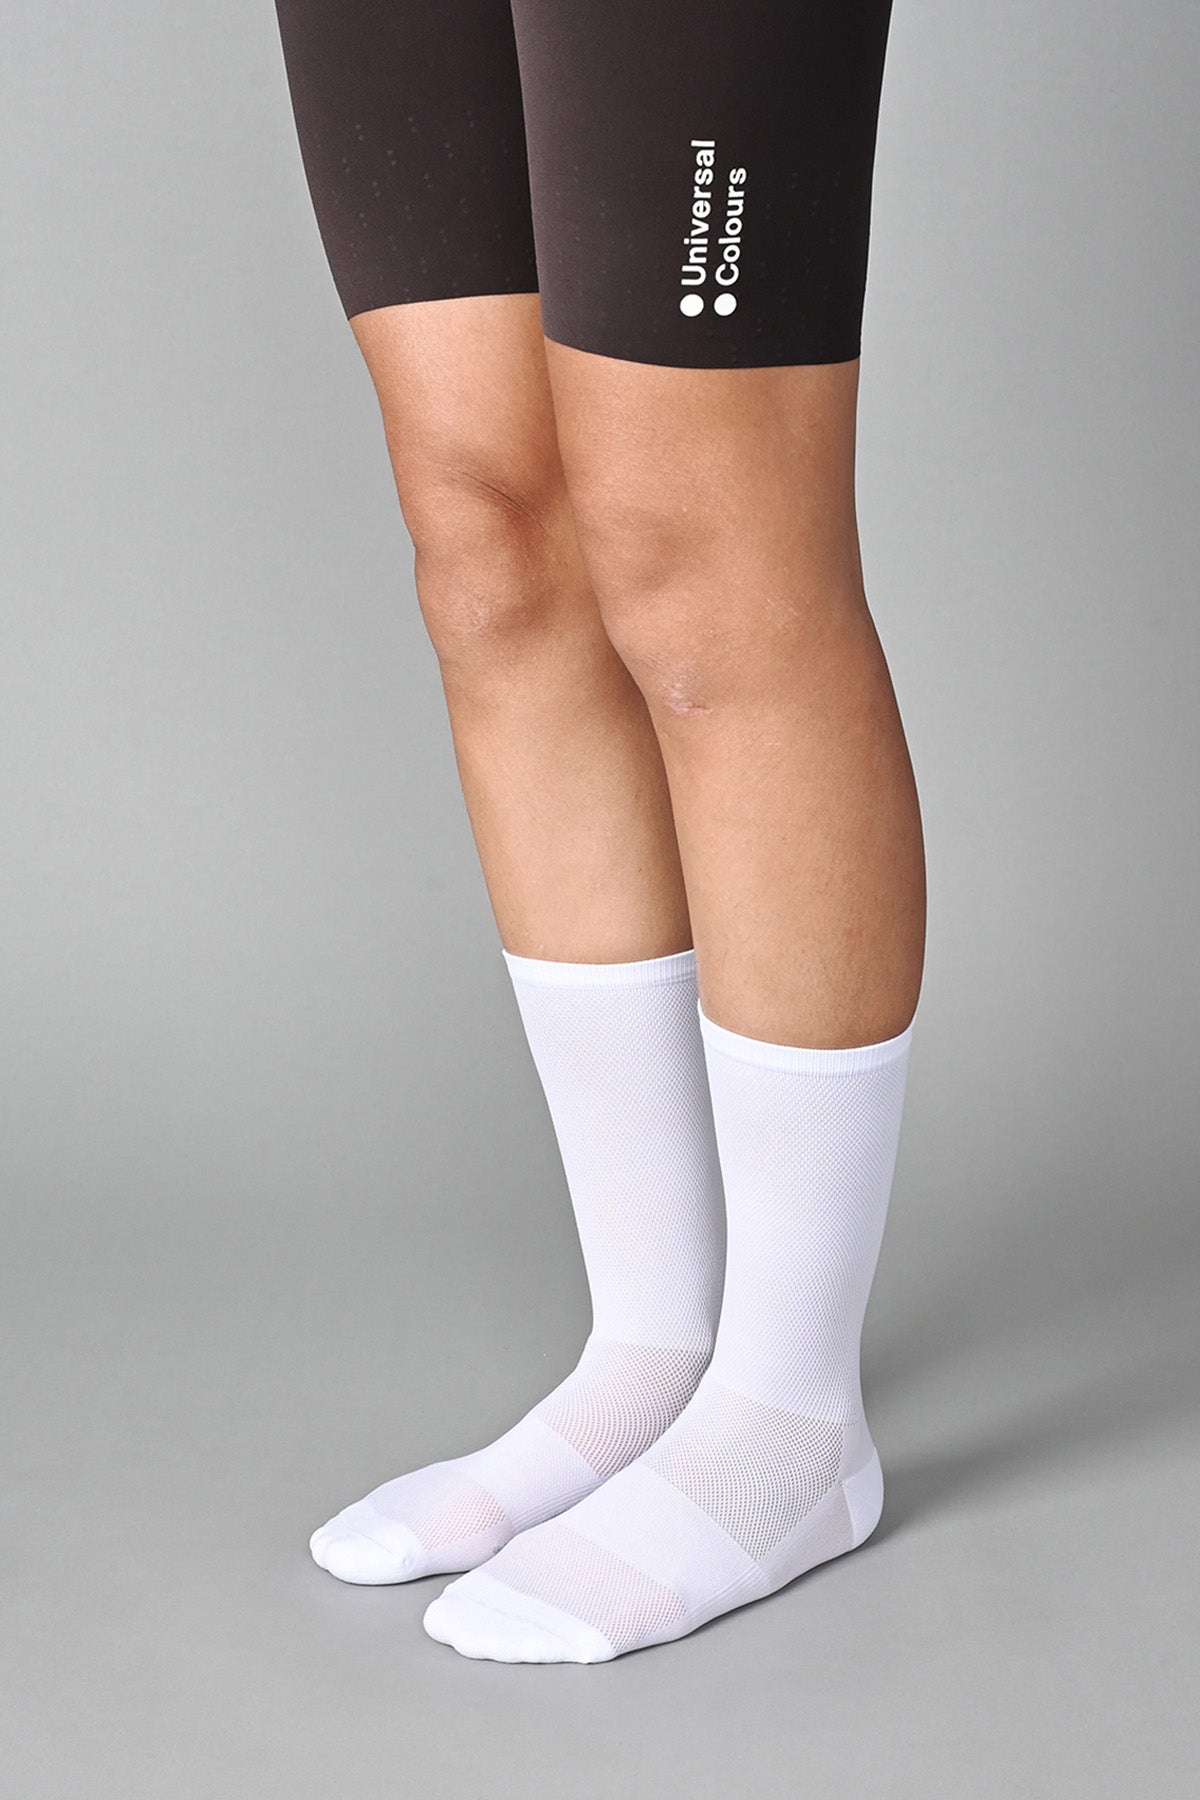 STEALTH - WHITE FRONT SIDE | BEST CYCLING SOCKS